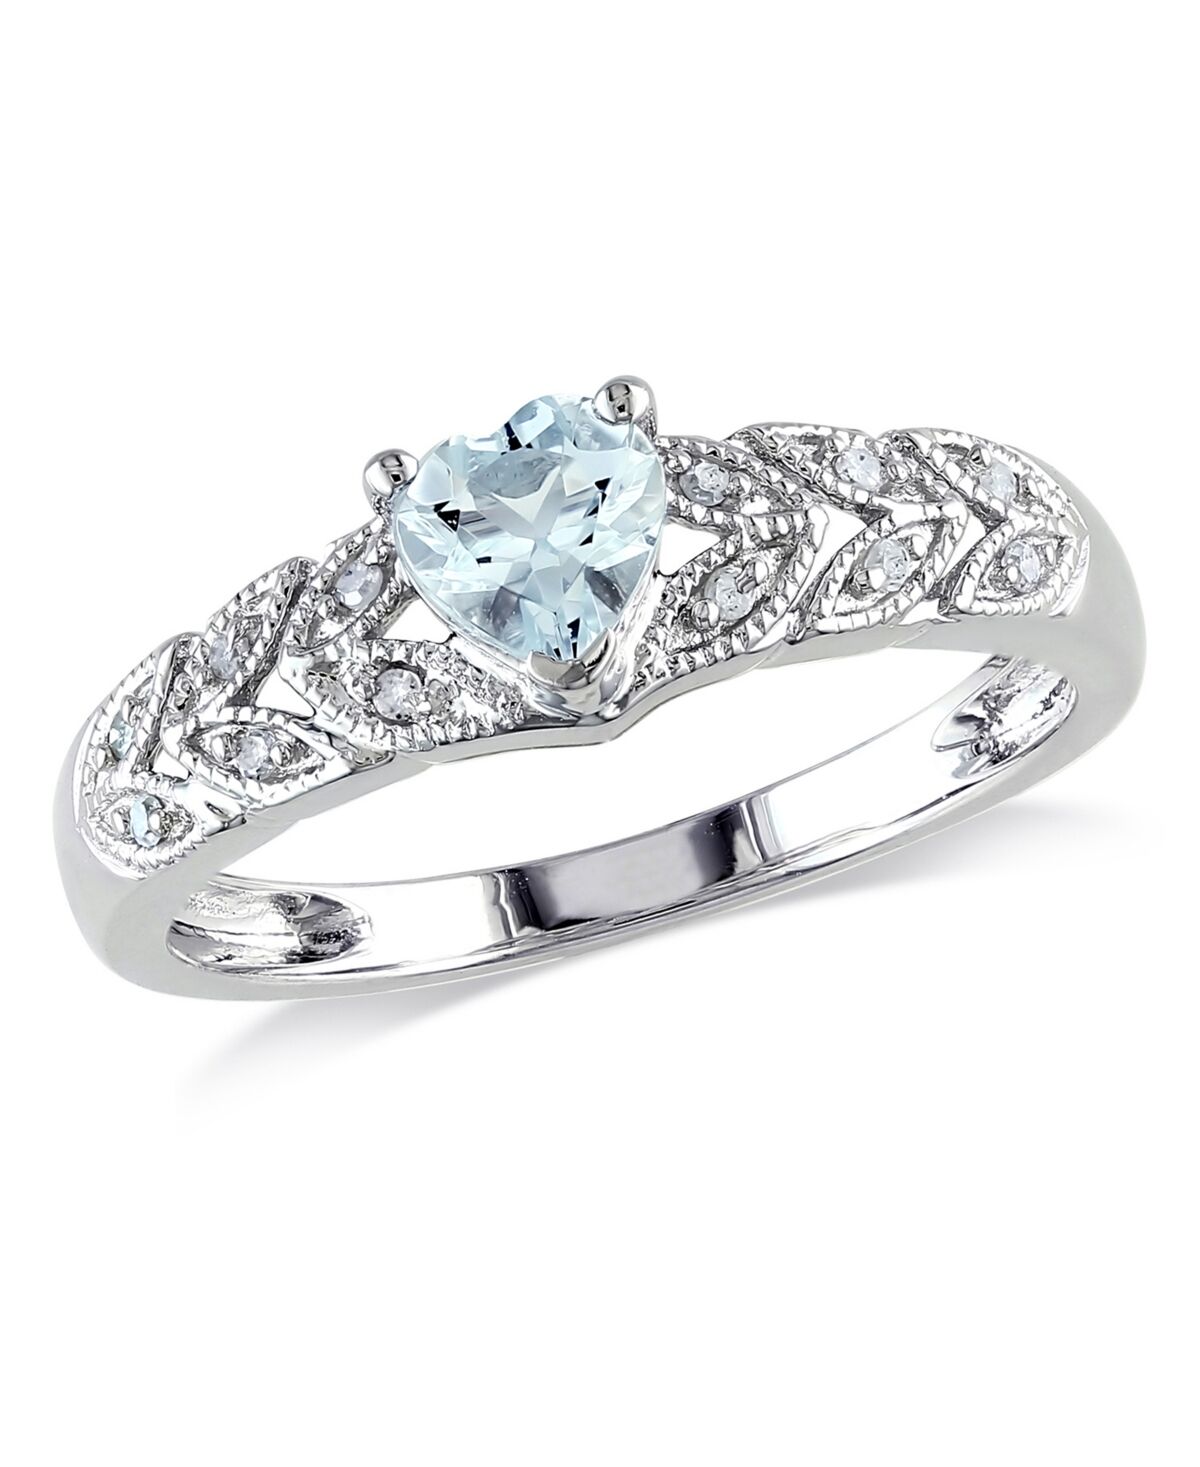 Macy's Aquamarine (1/3 ct. t.w.) and Diamond Accent (1/20 ct. t.w.) Sterling Silver, Vintage Like Heart Ring - Aquamarine